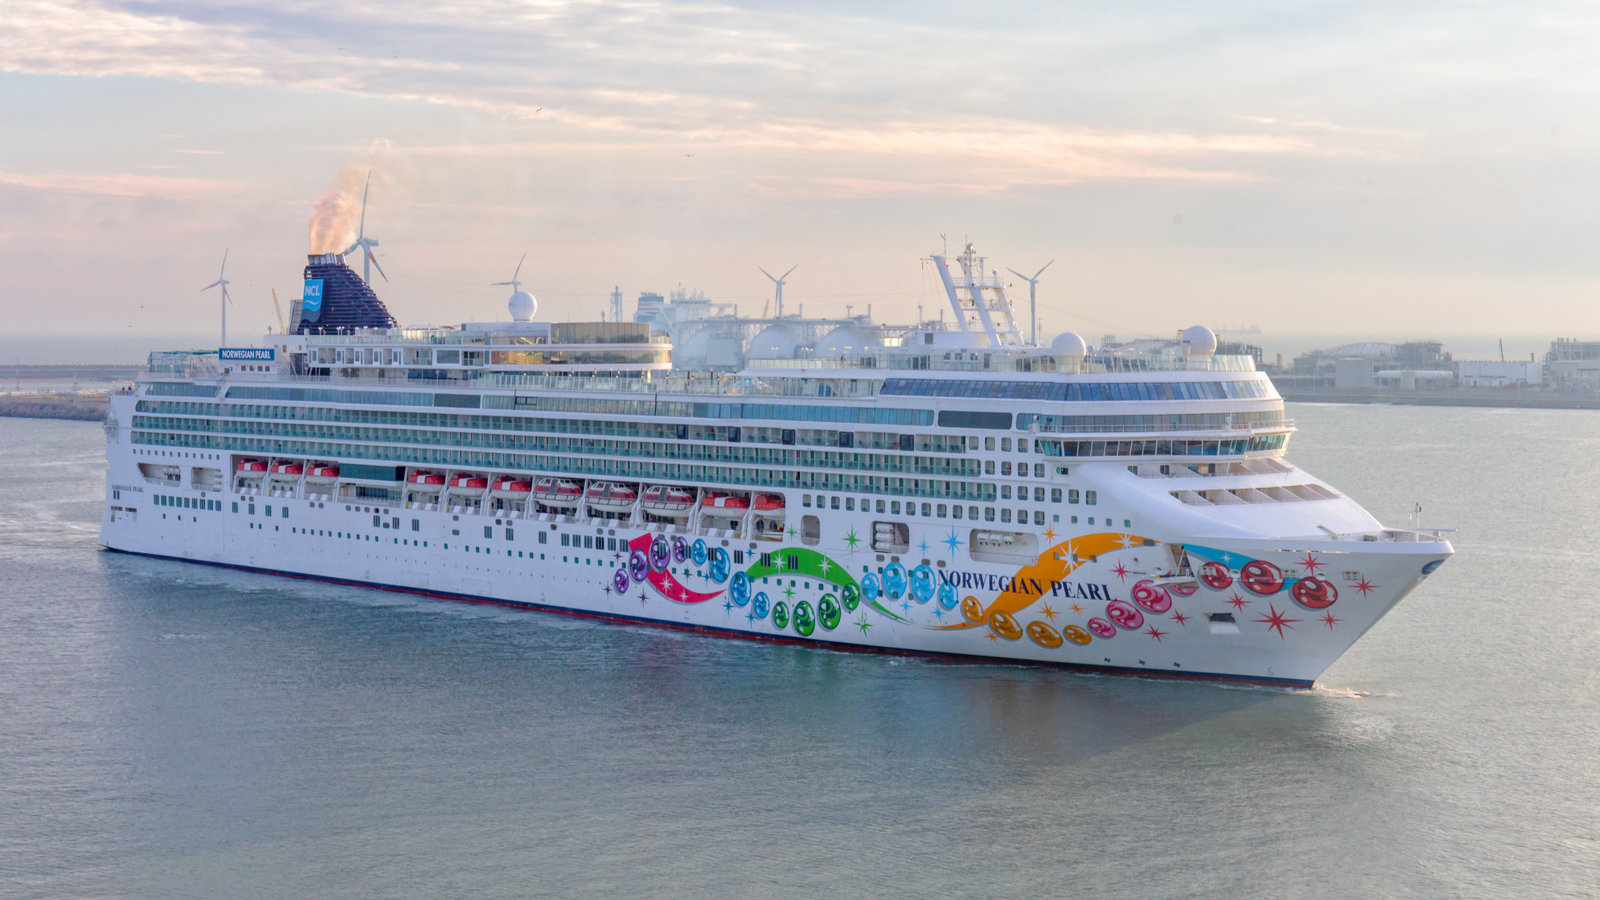 Norwegian Cruise Line ship arriving at a port. NCLH stock.